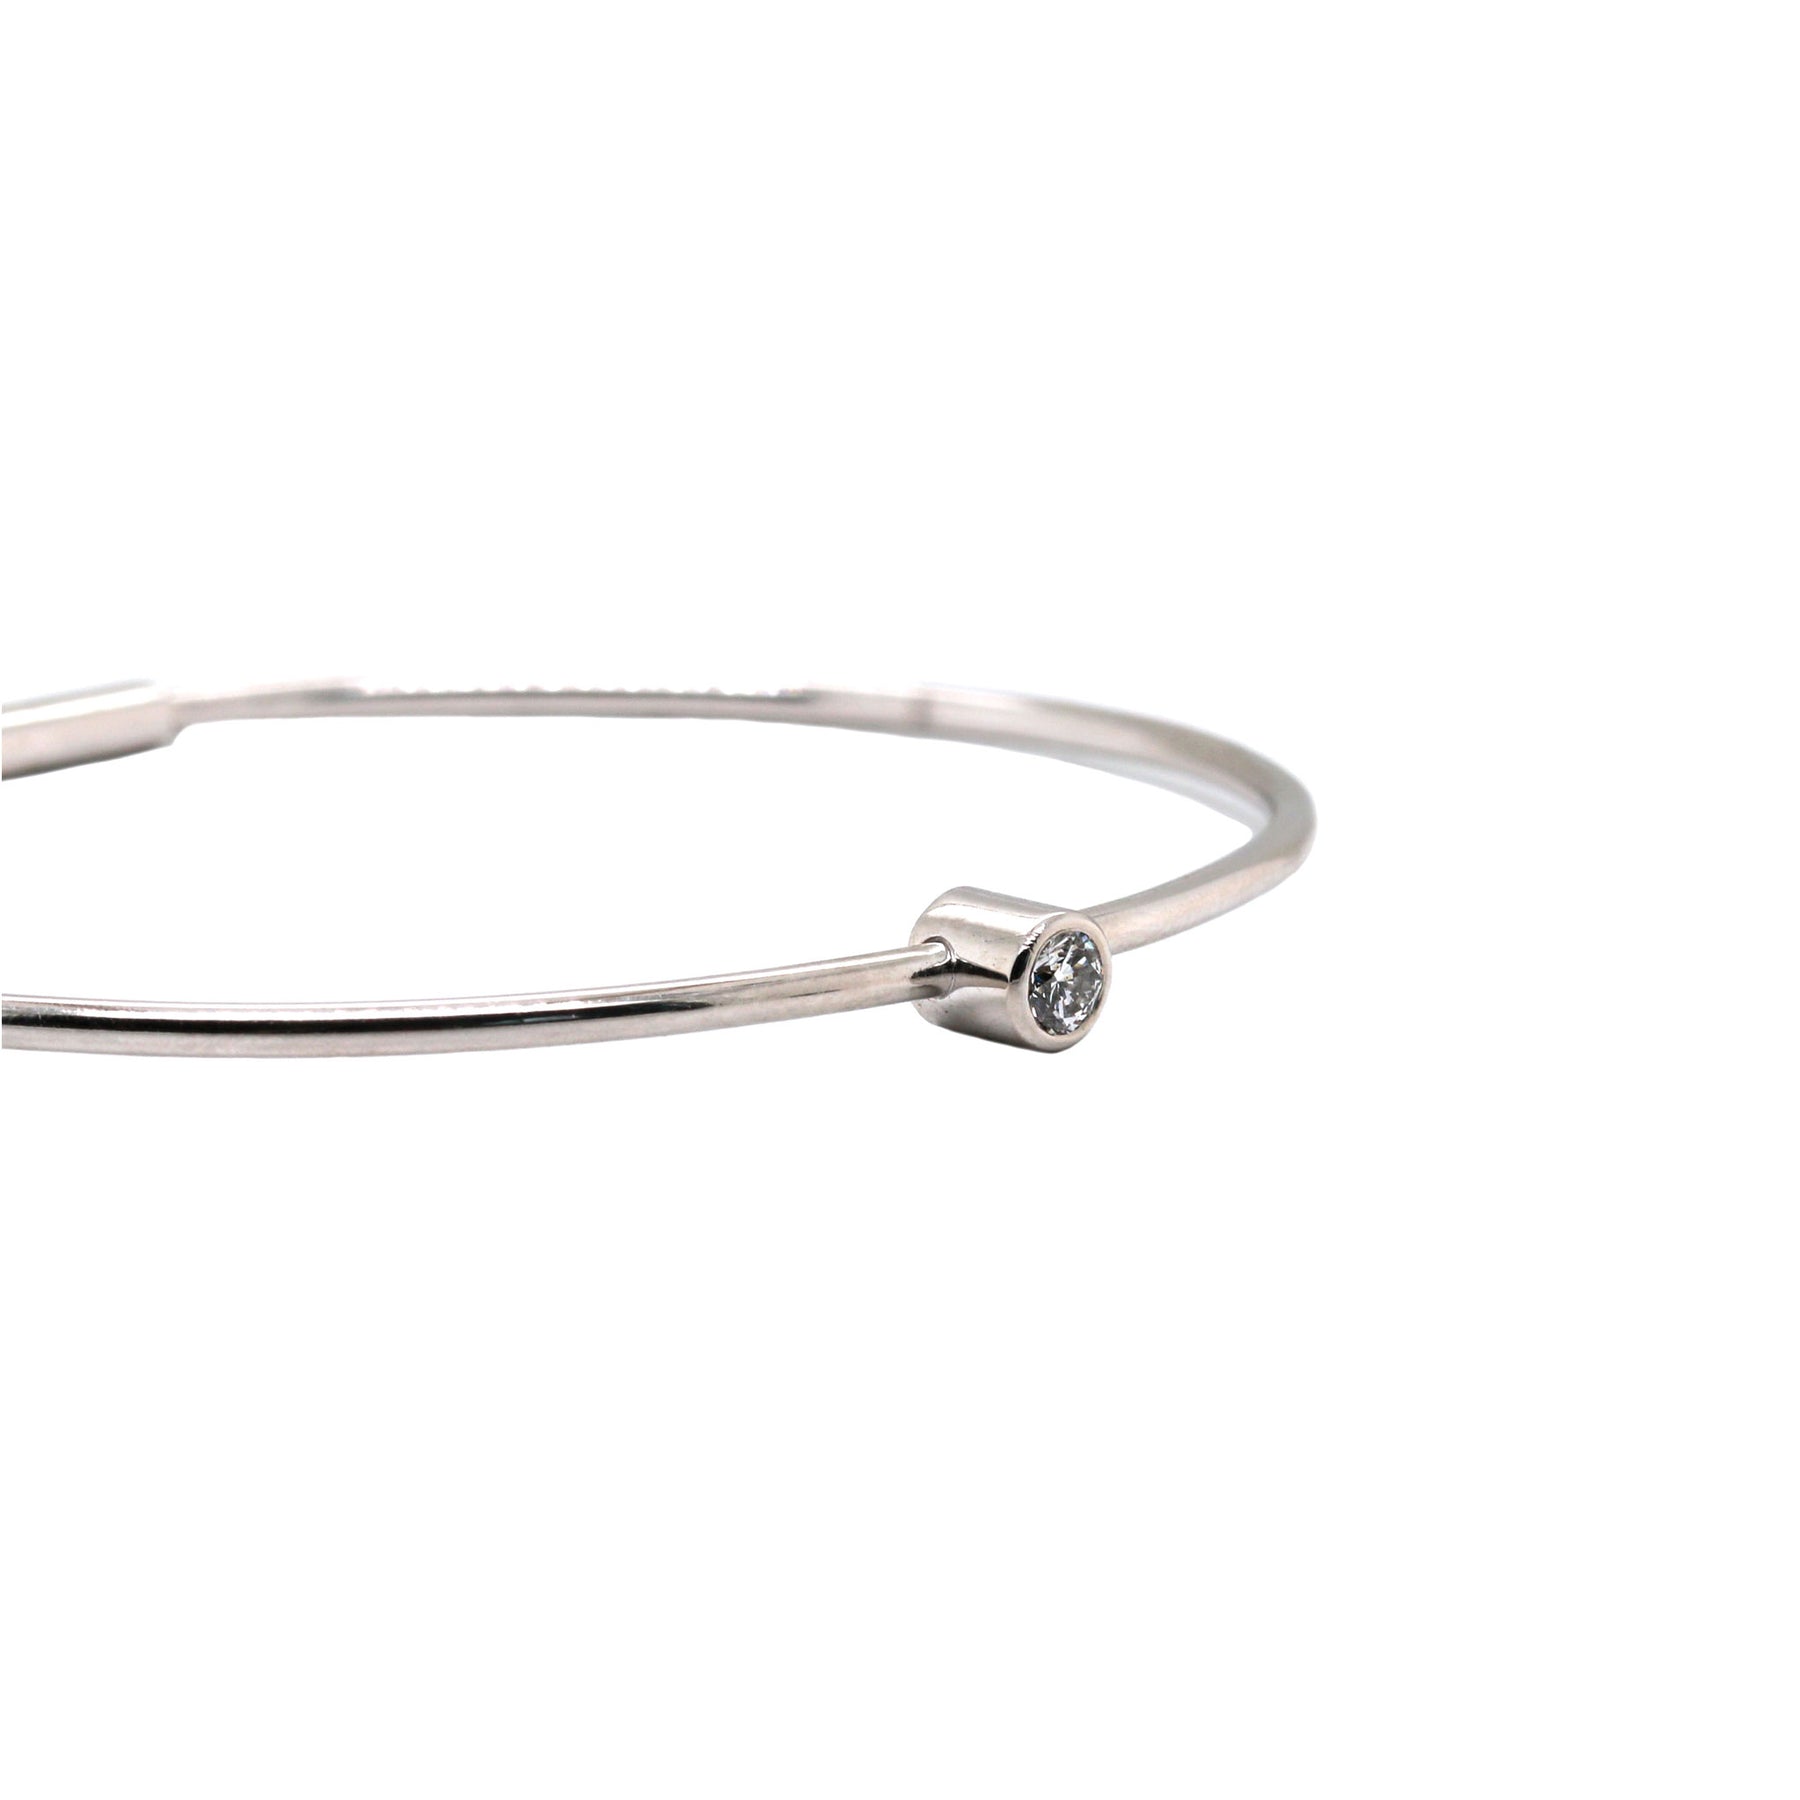 Platinum Bangle for Women with Centre Lining of Diamond Cutting JL PT 624